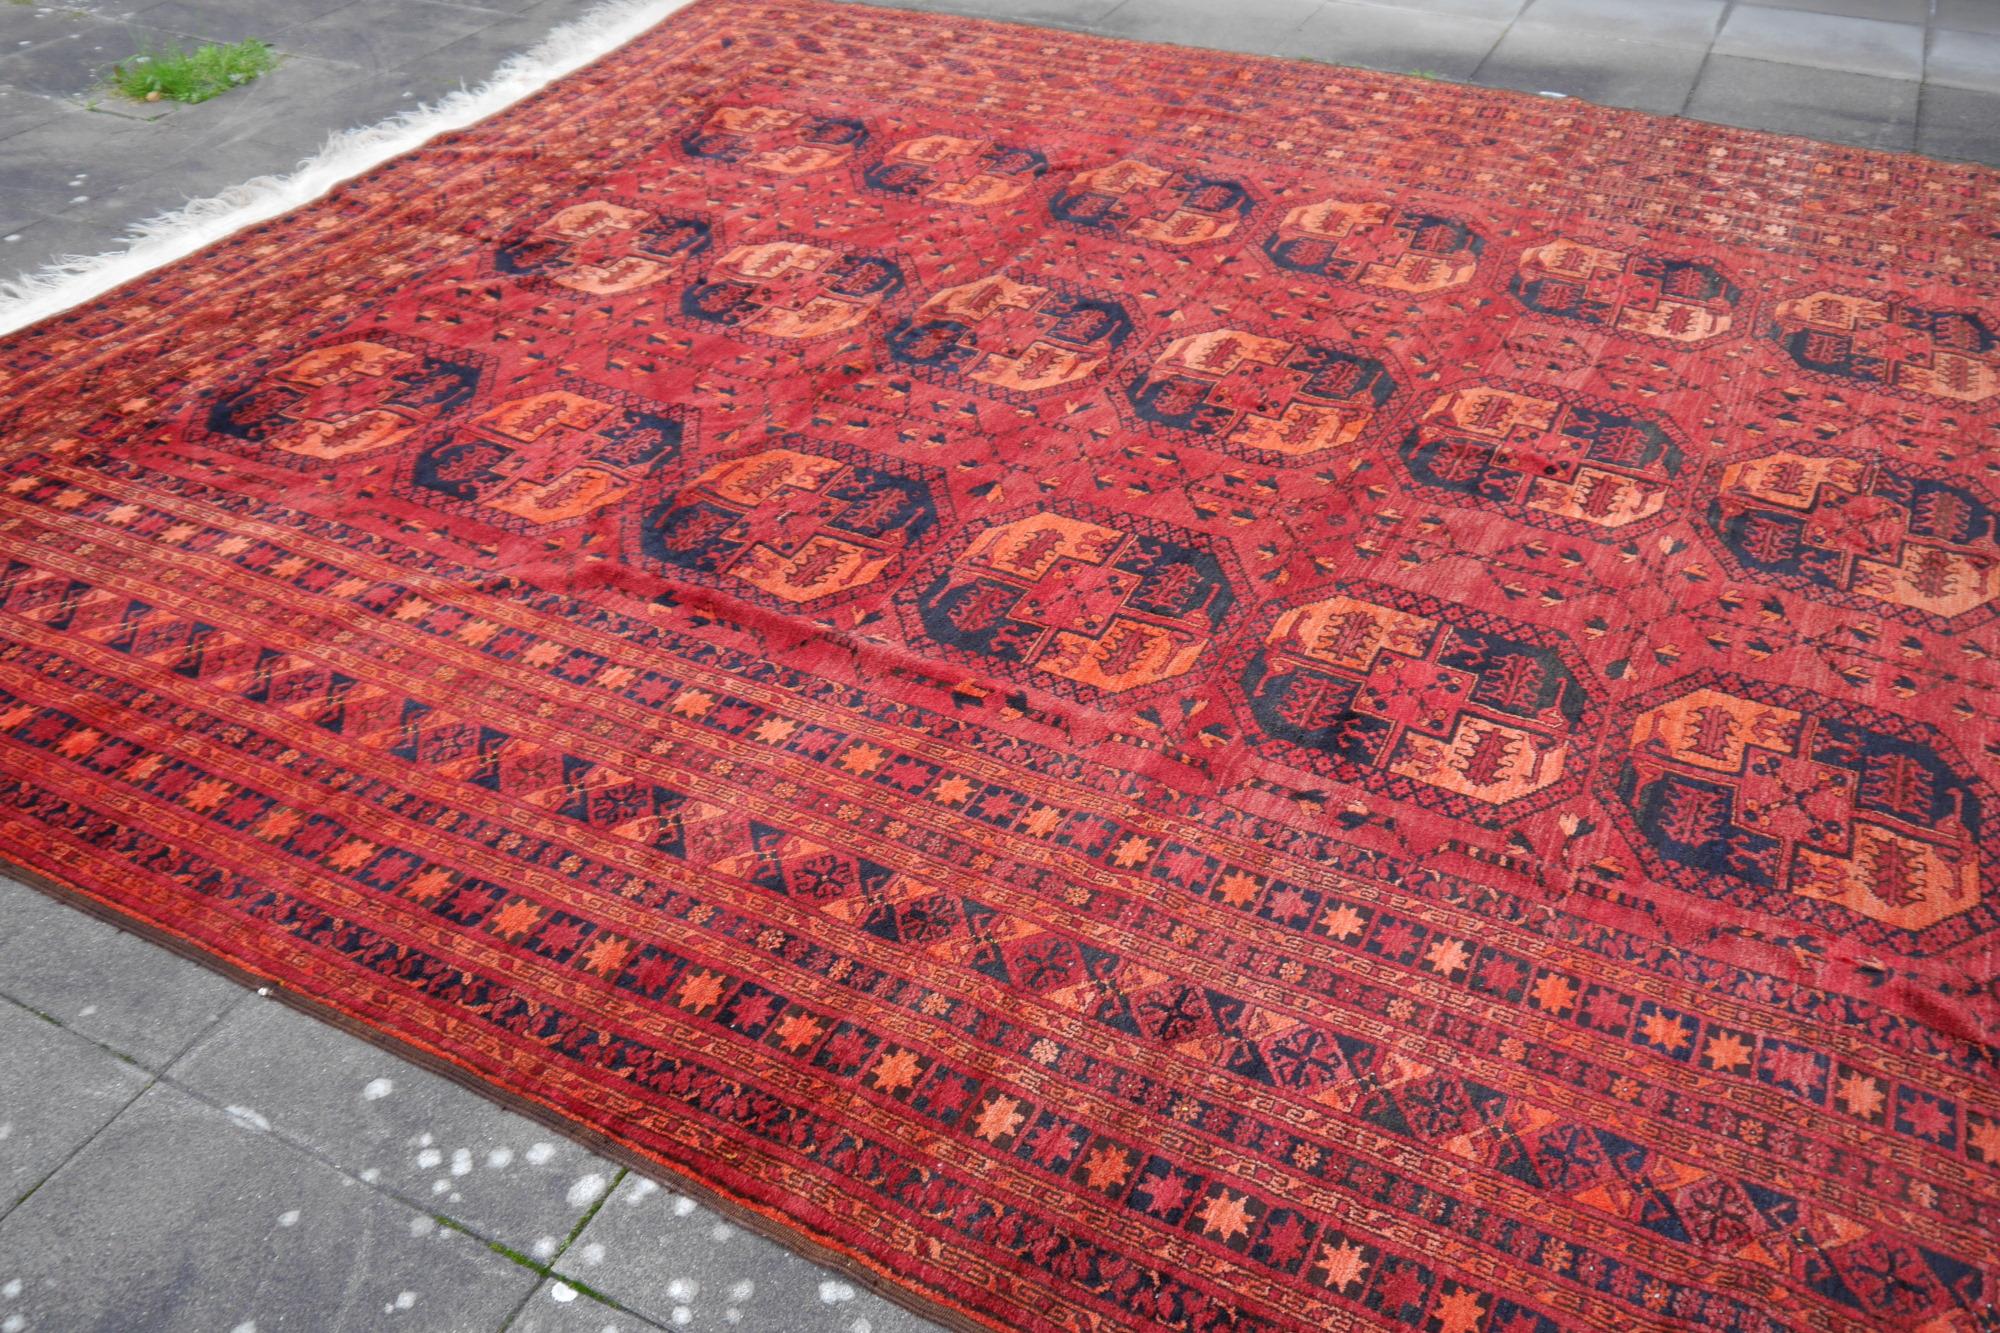 Ersari rug 11.2 x 15.5 ft oversized tribal Turkoman hand knotted antique carpet For Sale 2